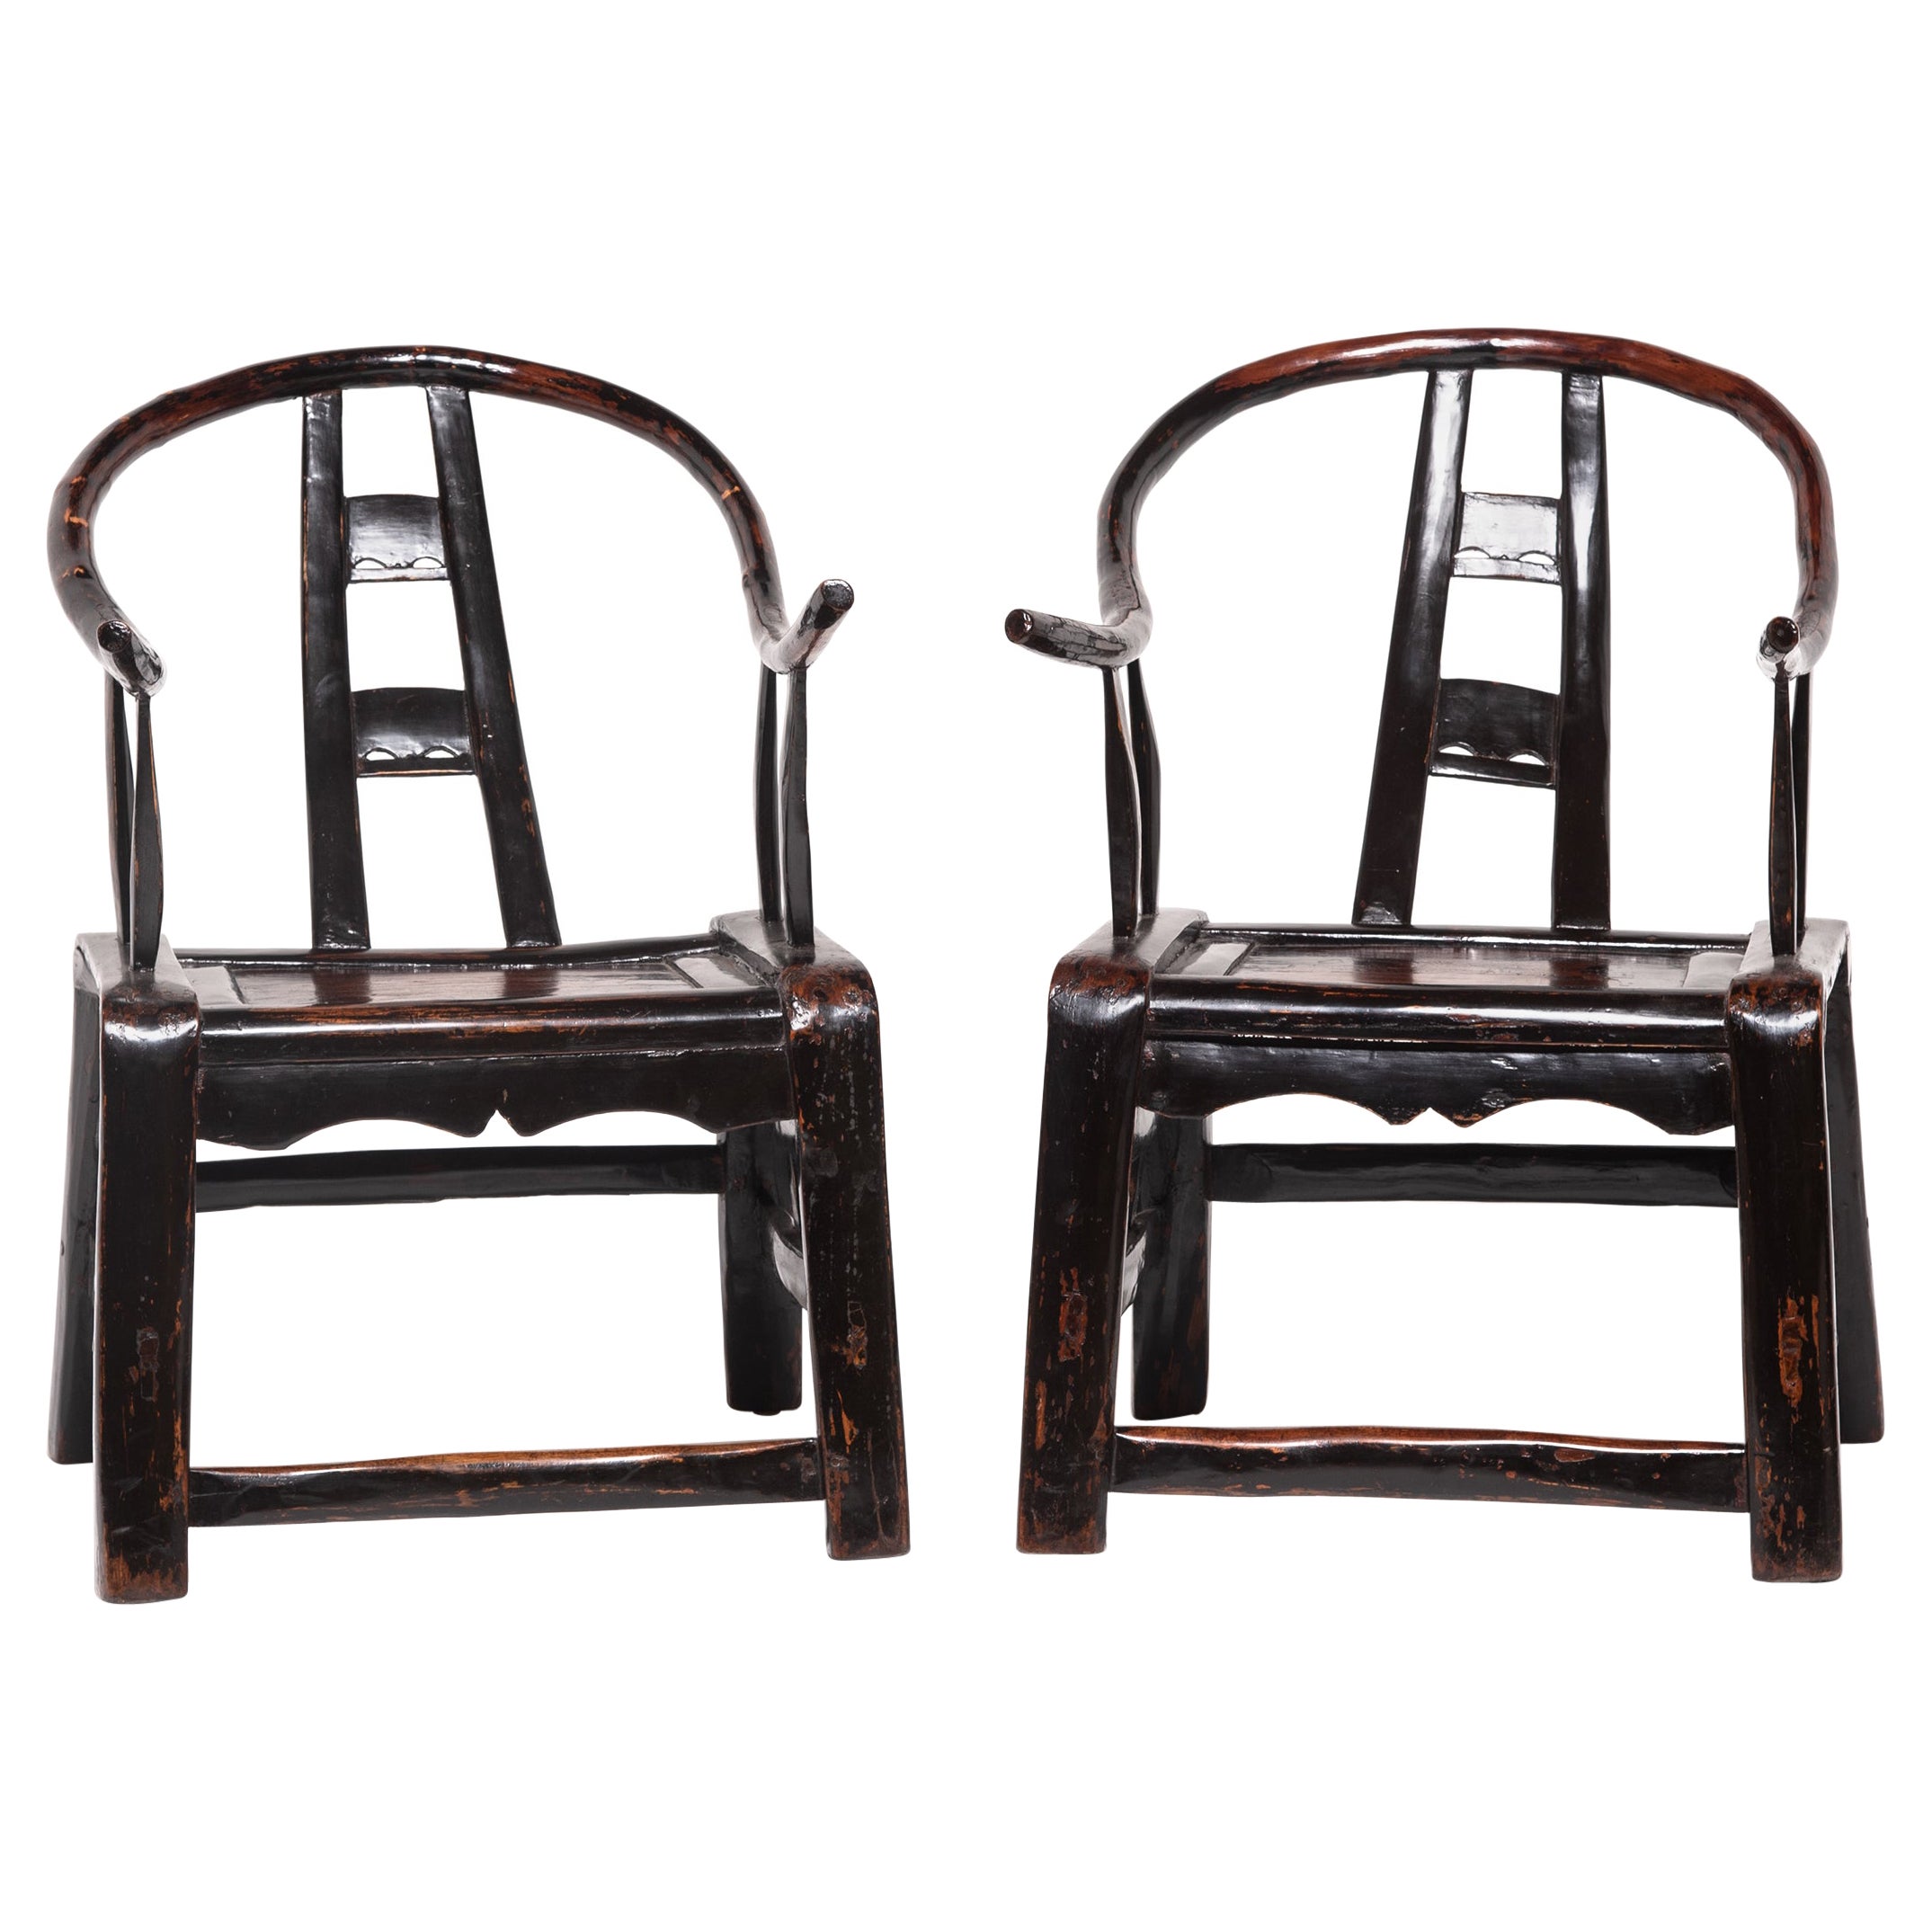 Pair of Low Chinese Roundback Chairs, c. 1850